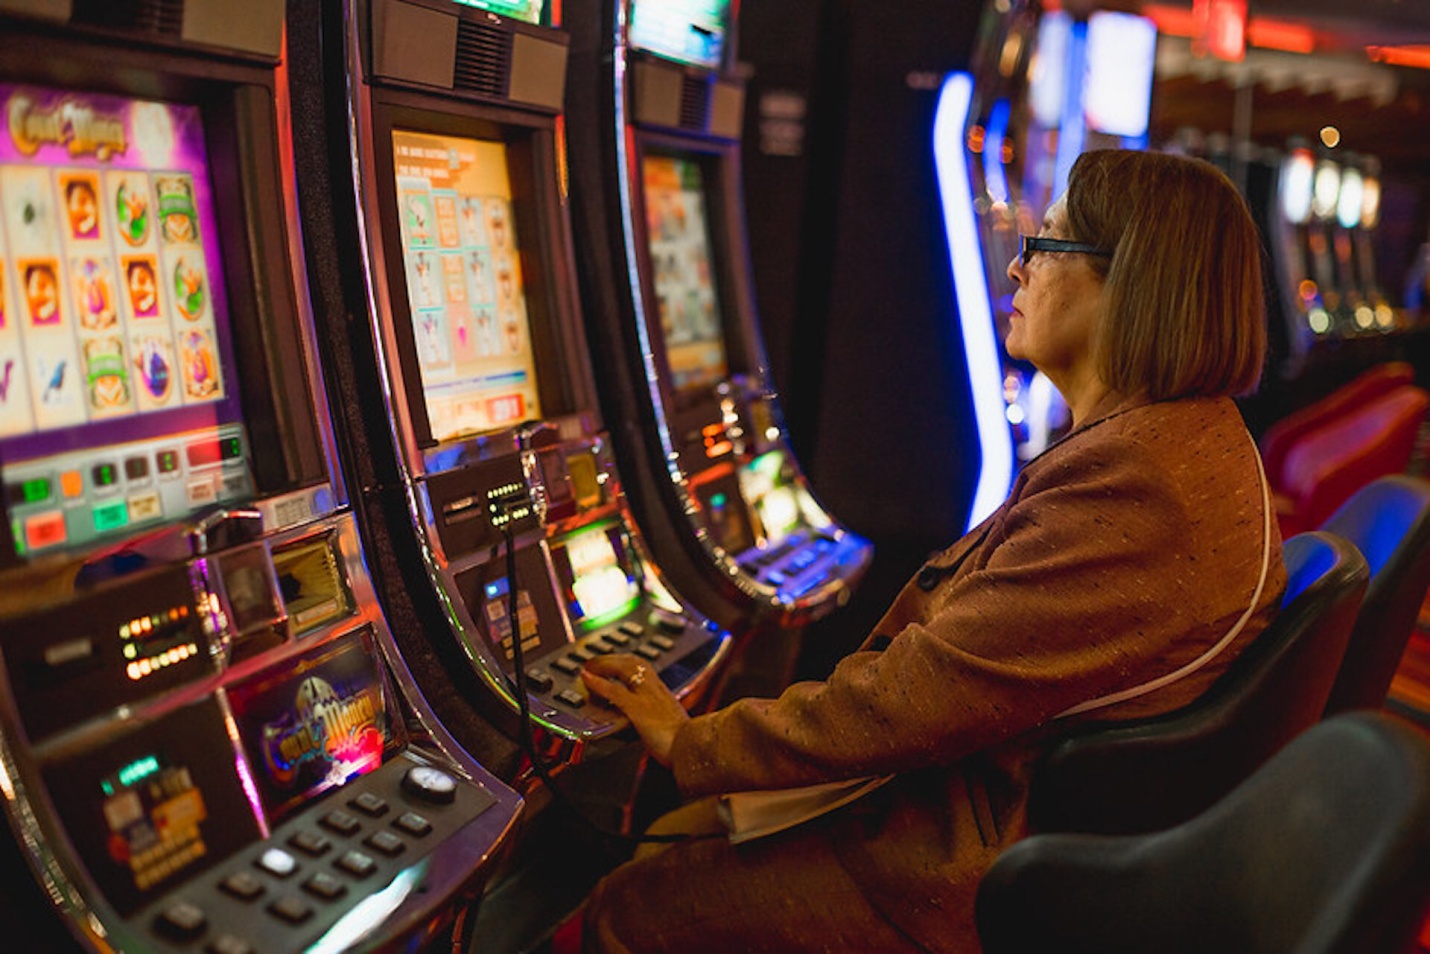 Texas Lawmakers Express Conflicting Views on Casino Gambling | The Texan